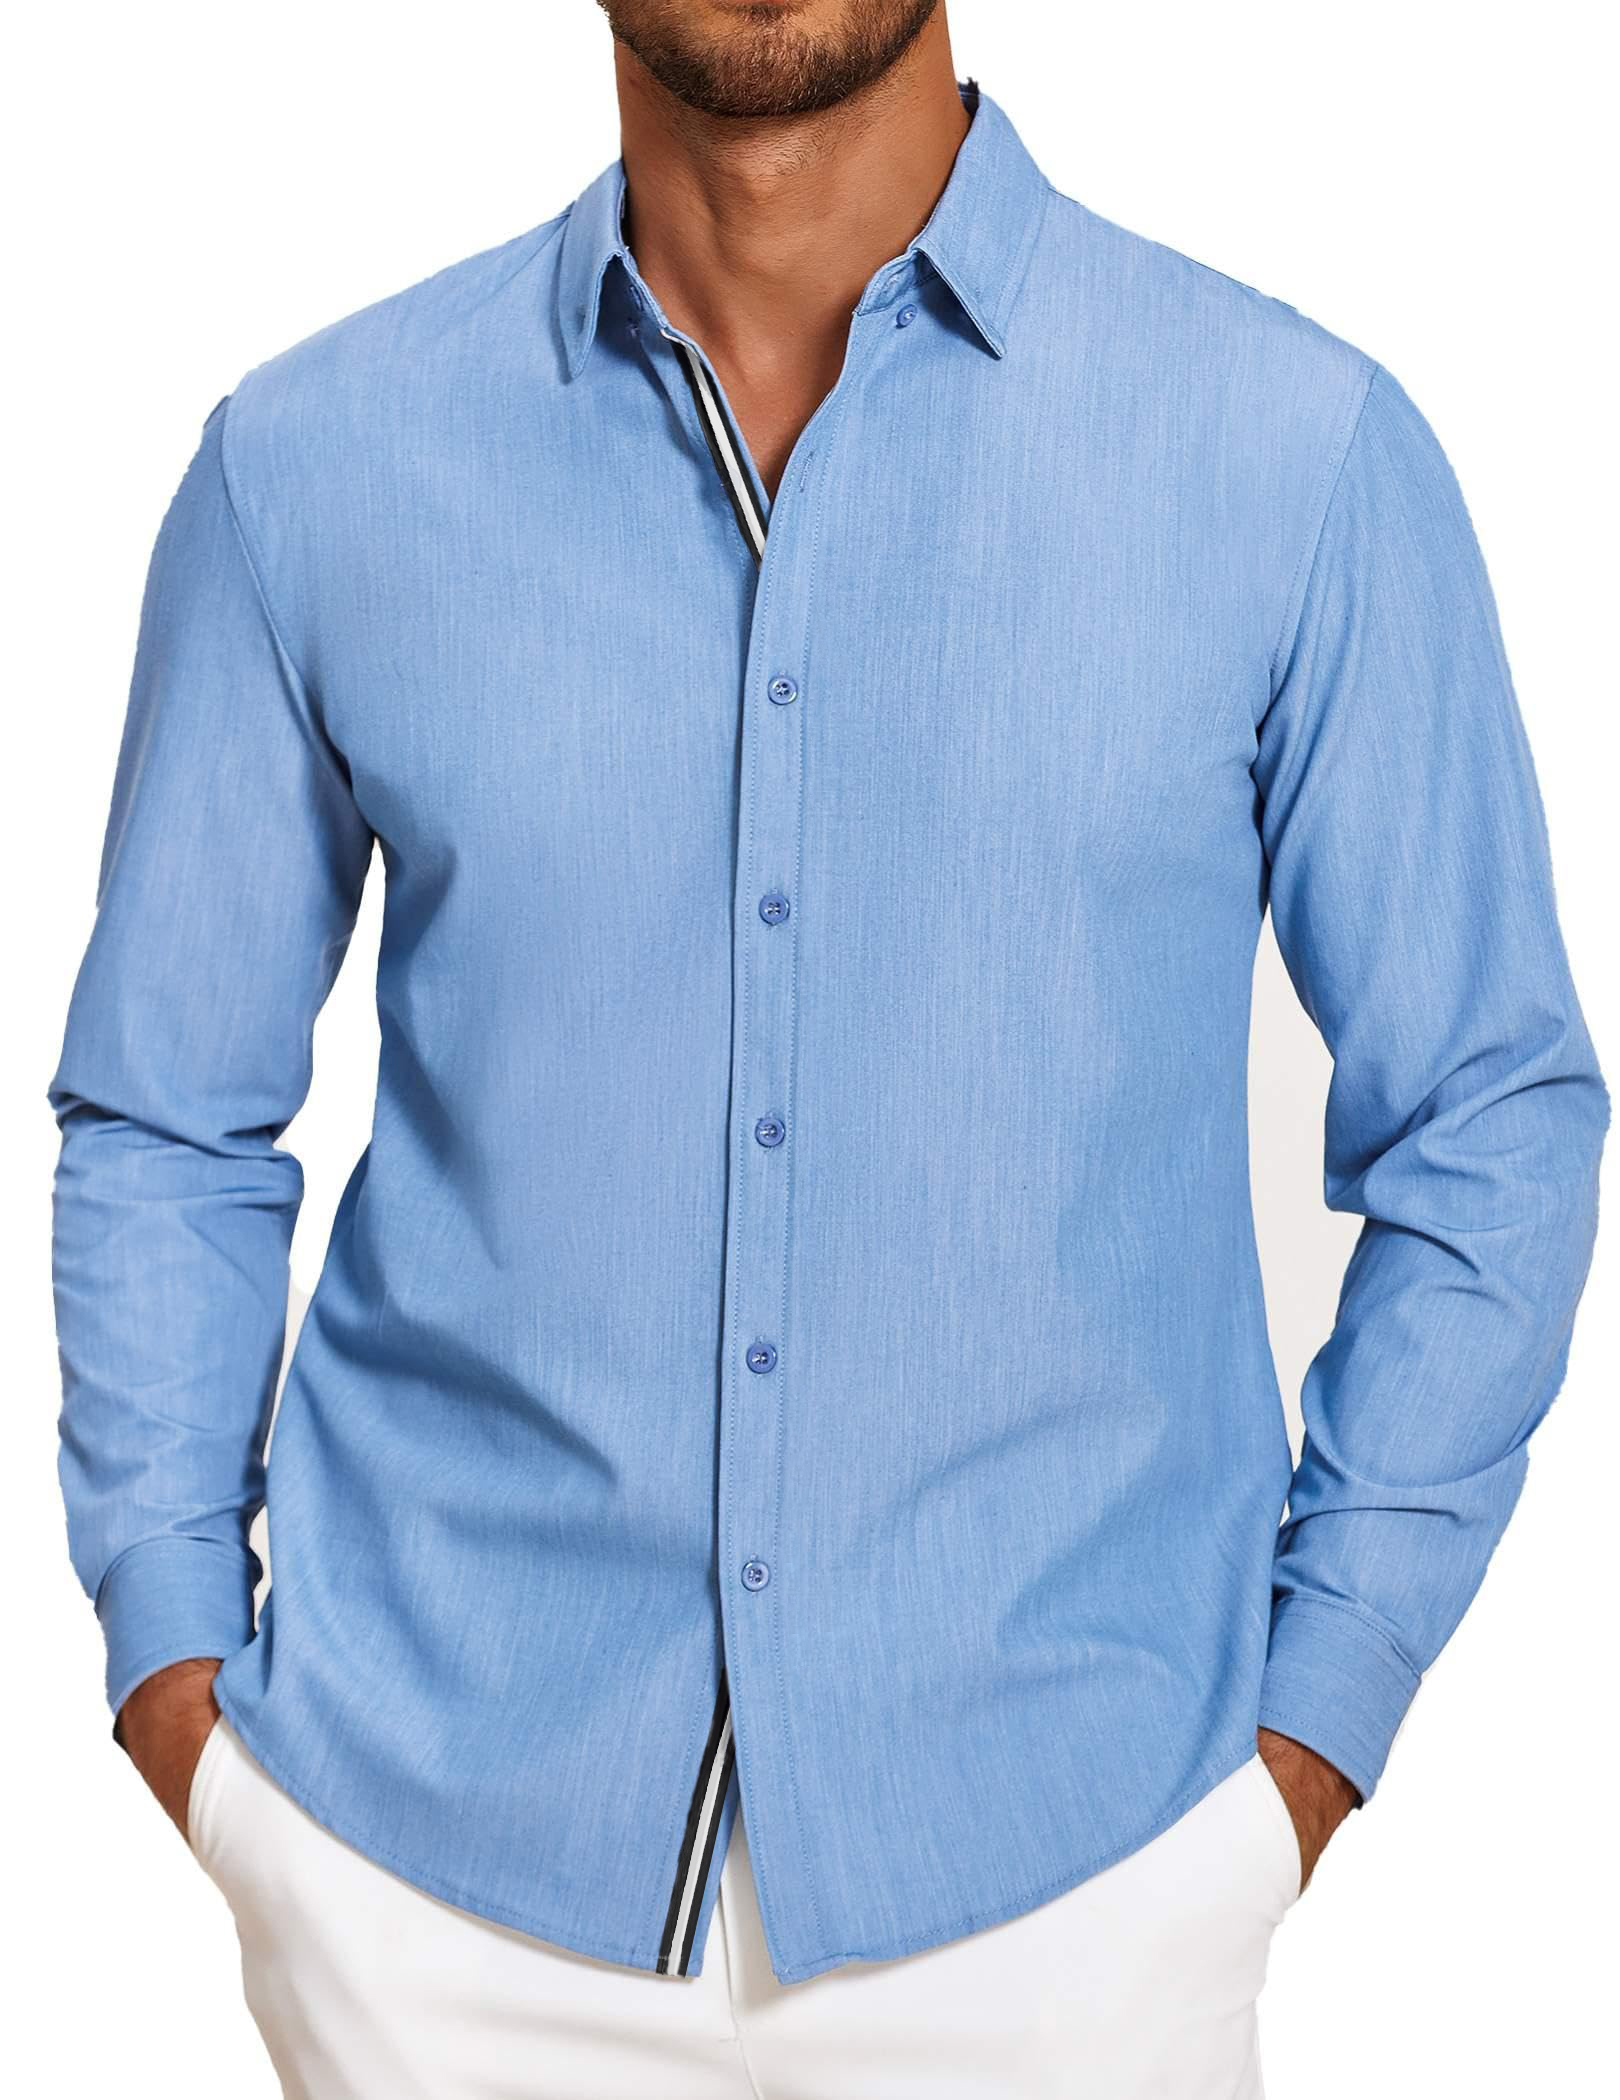 Men's Solid Color Simple and Comfortable Long Sleeve Shirt